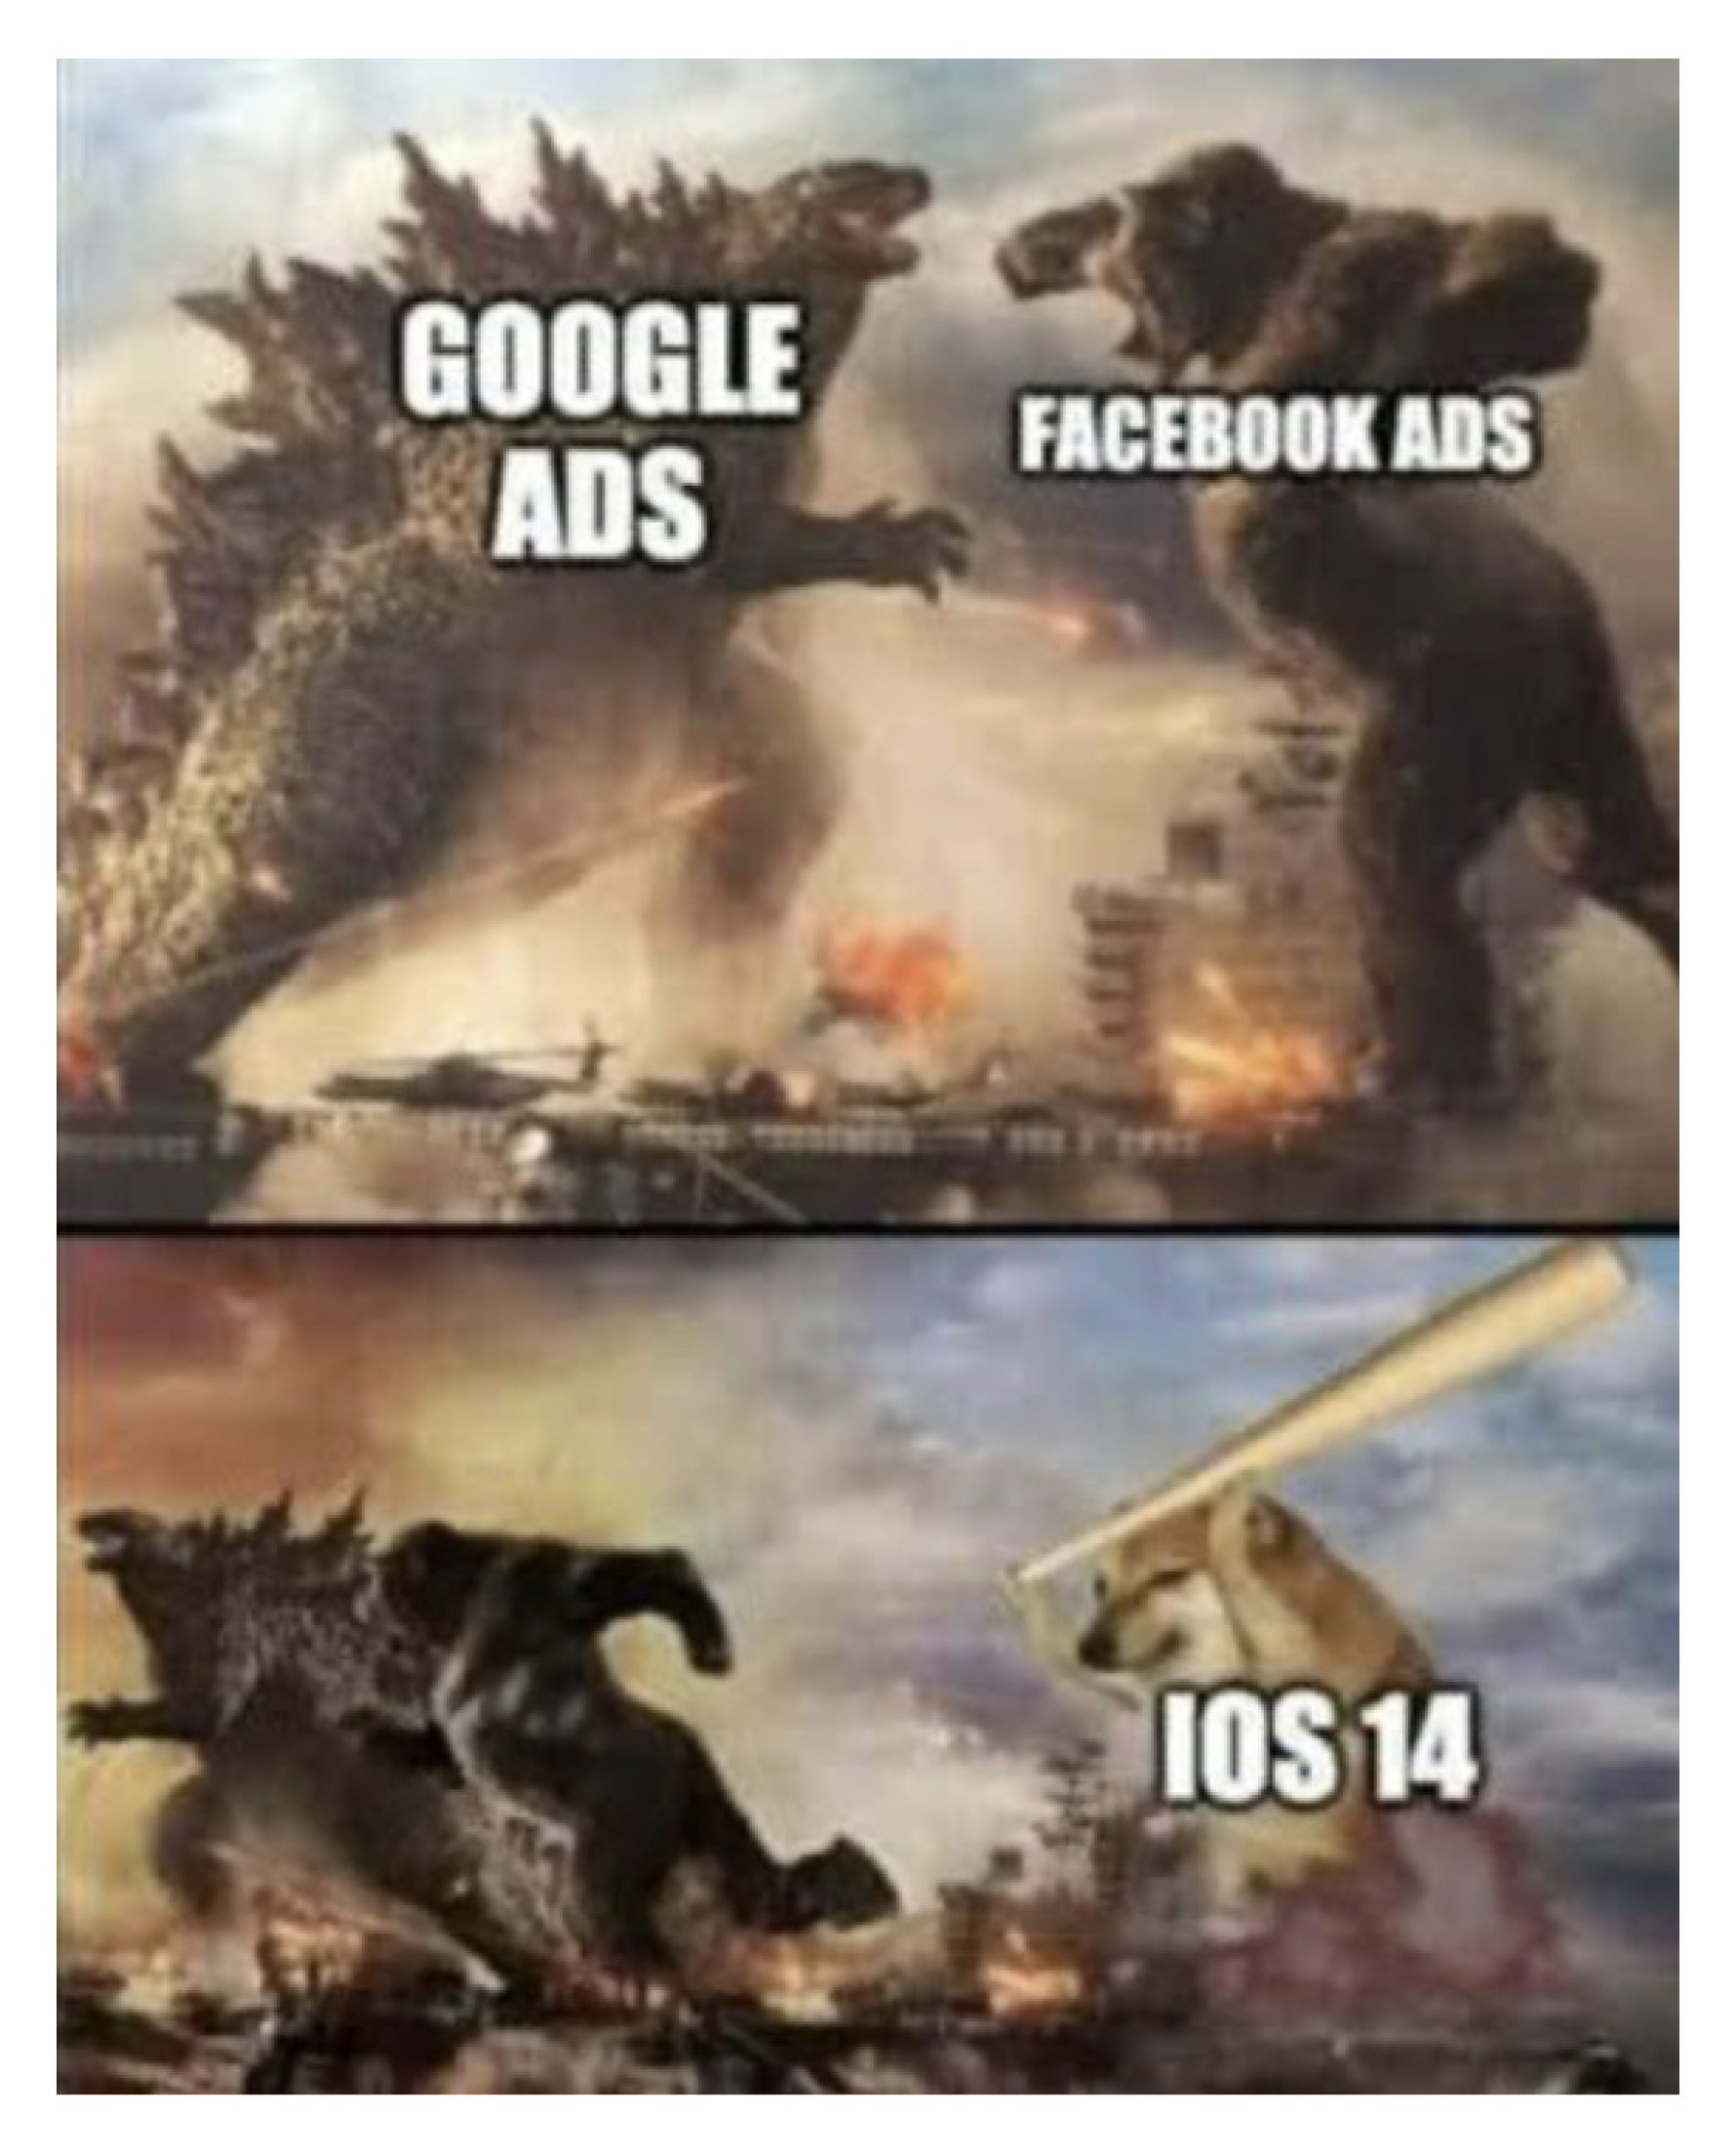 45 Hilarious Mobile Marketing Memes You Can't Resist Sharing